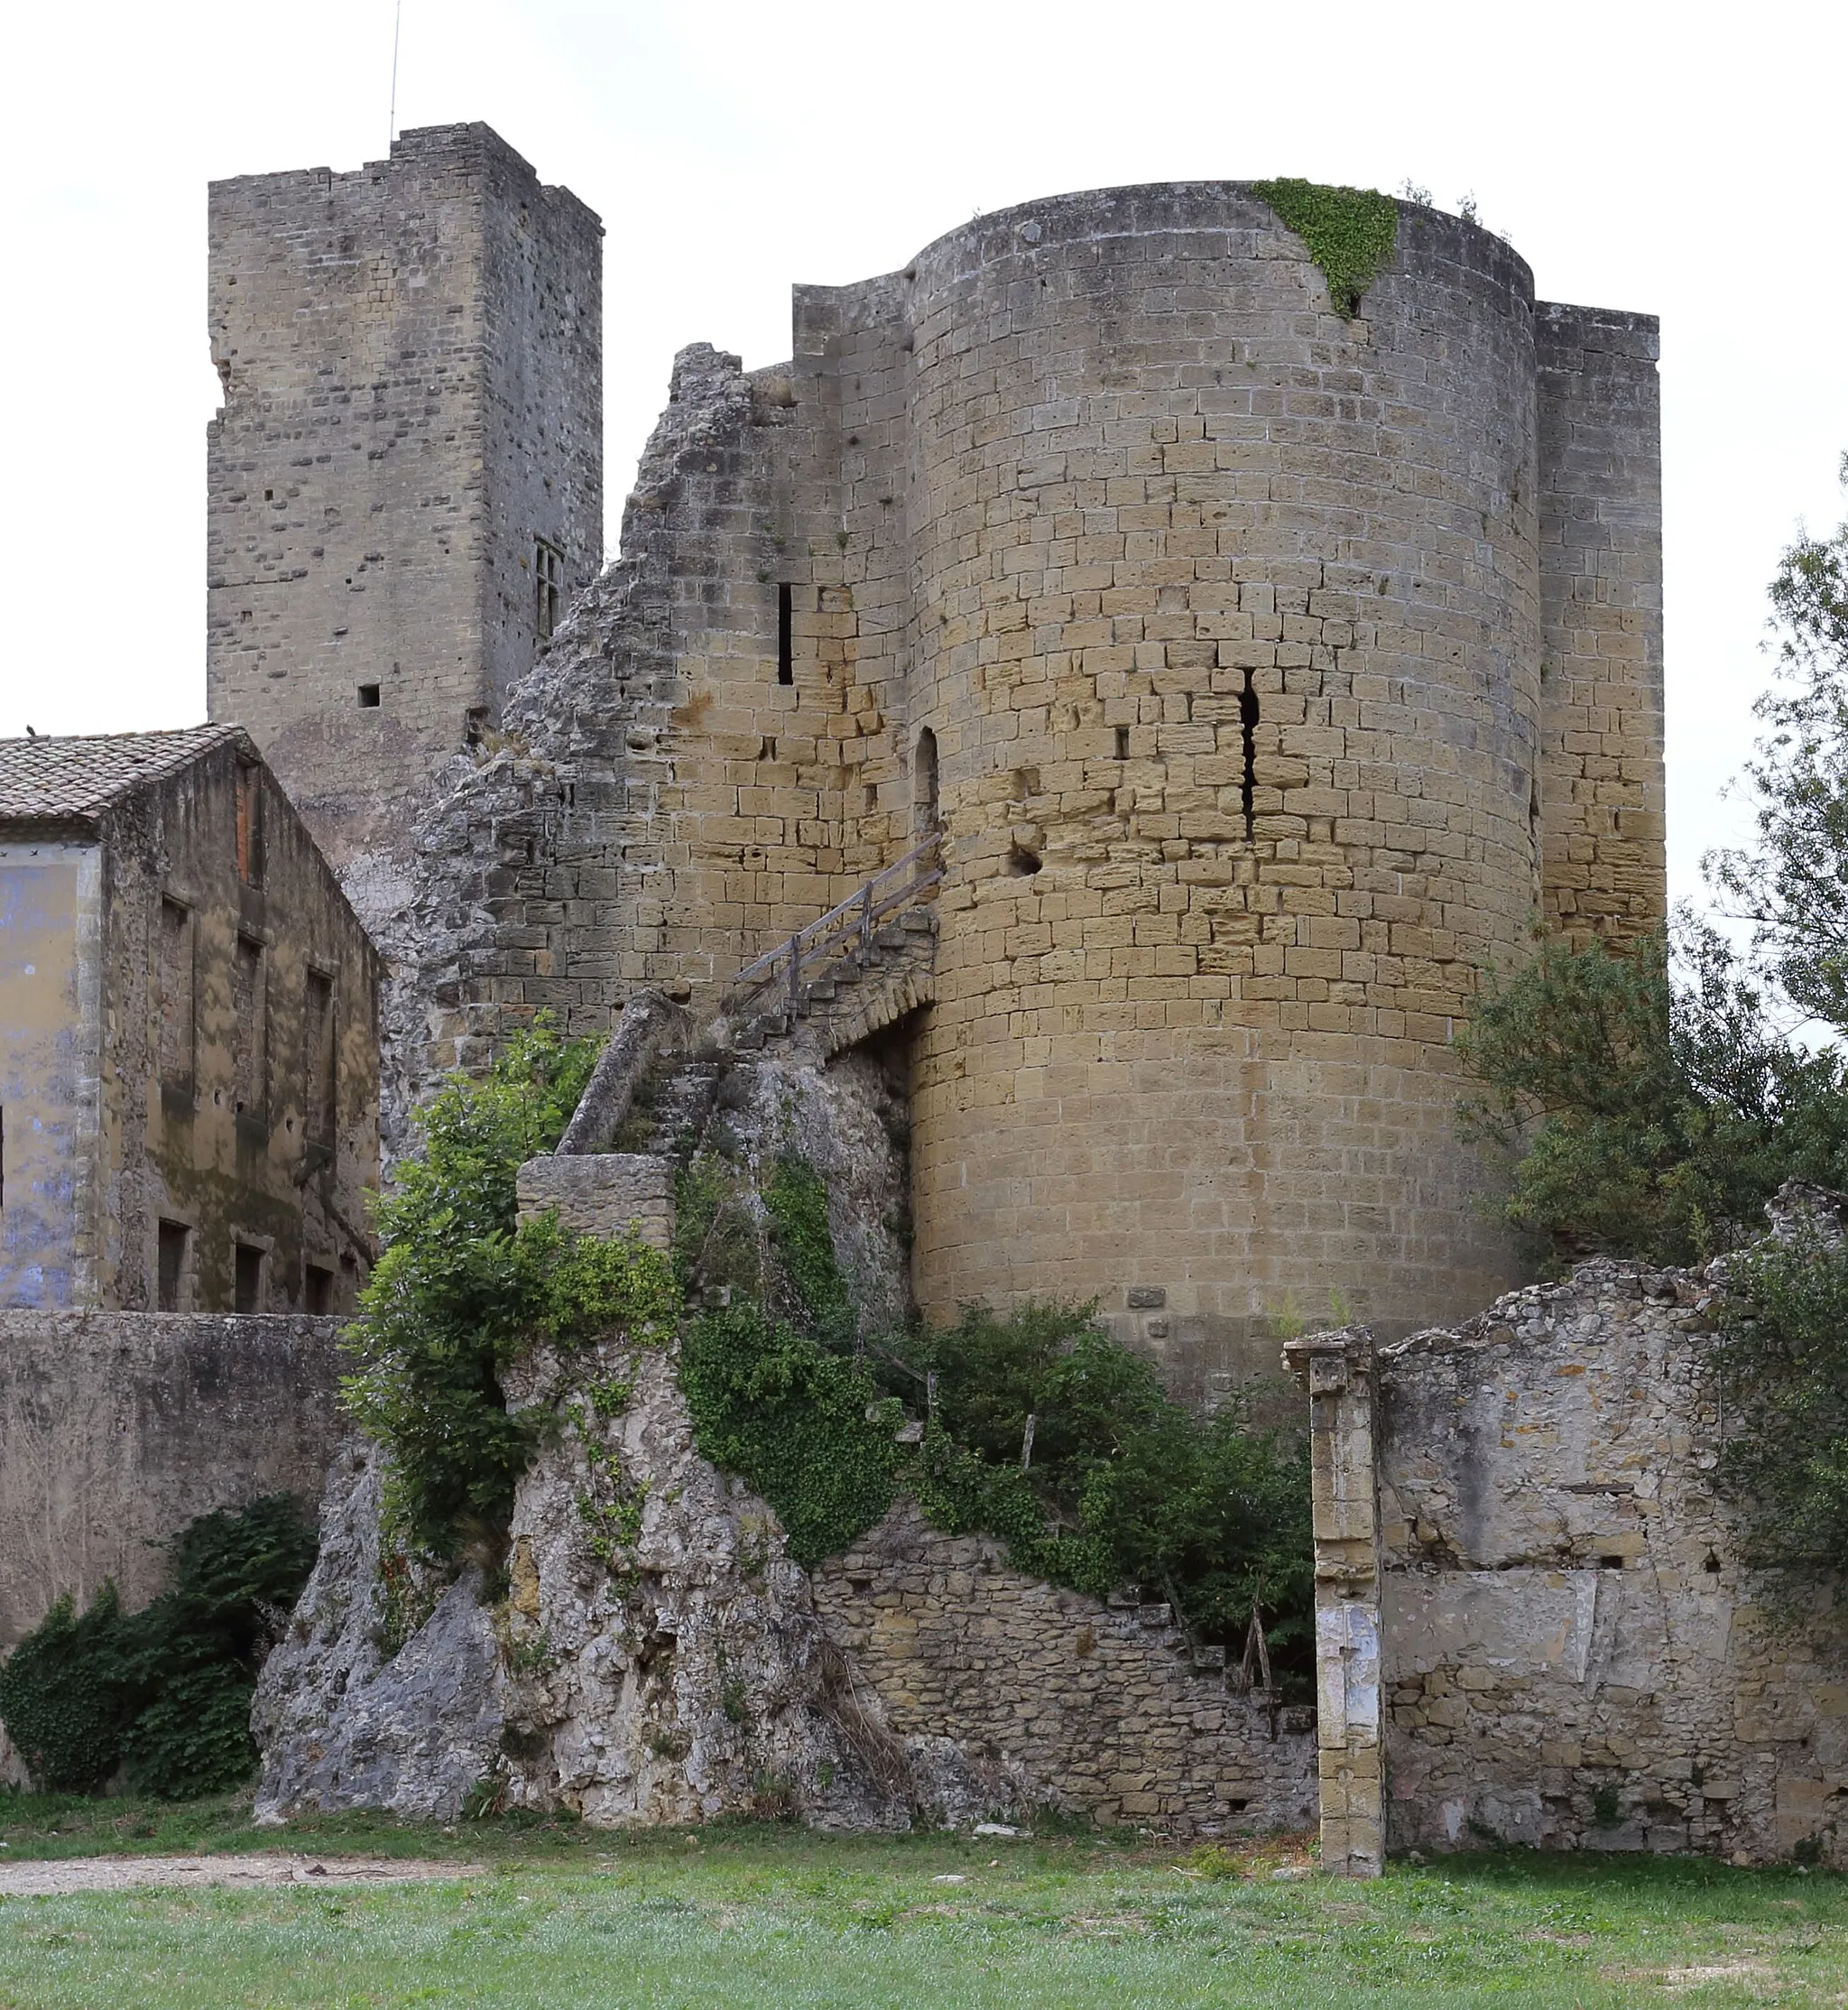 Photo showing: The ruins of the Round Tower (Tour ronde) in Roquemaure (Gard). The tower dates from the 13th century and formed part of the medieval castle.